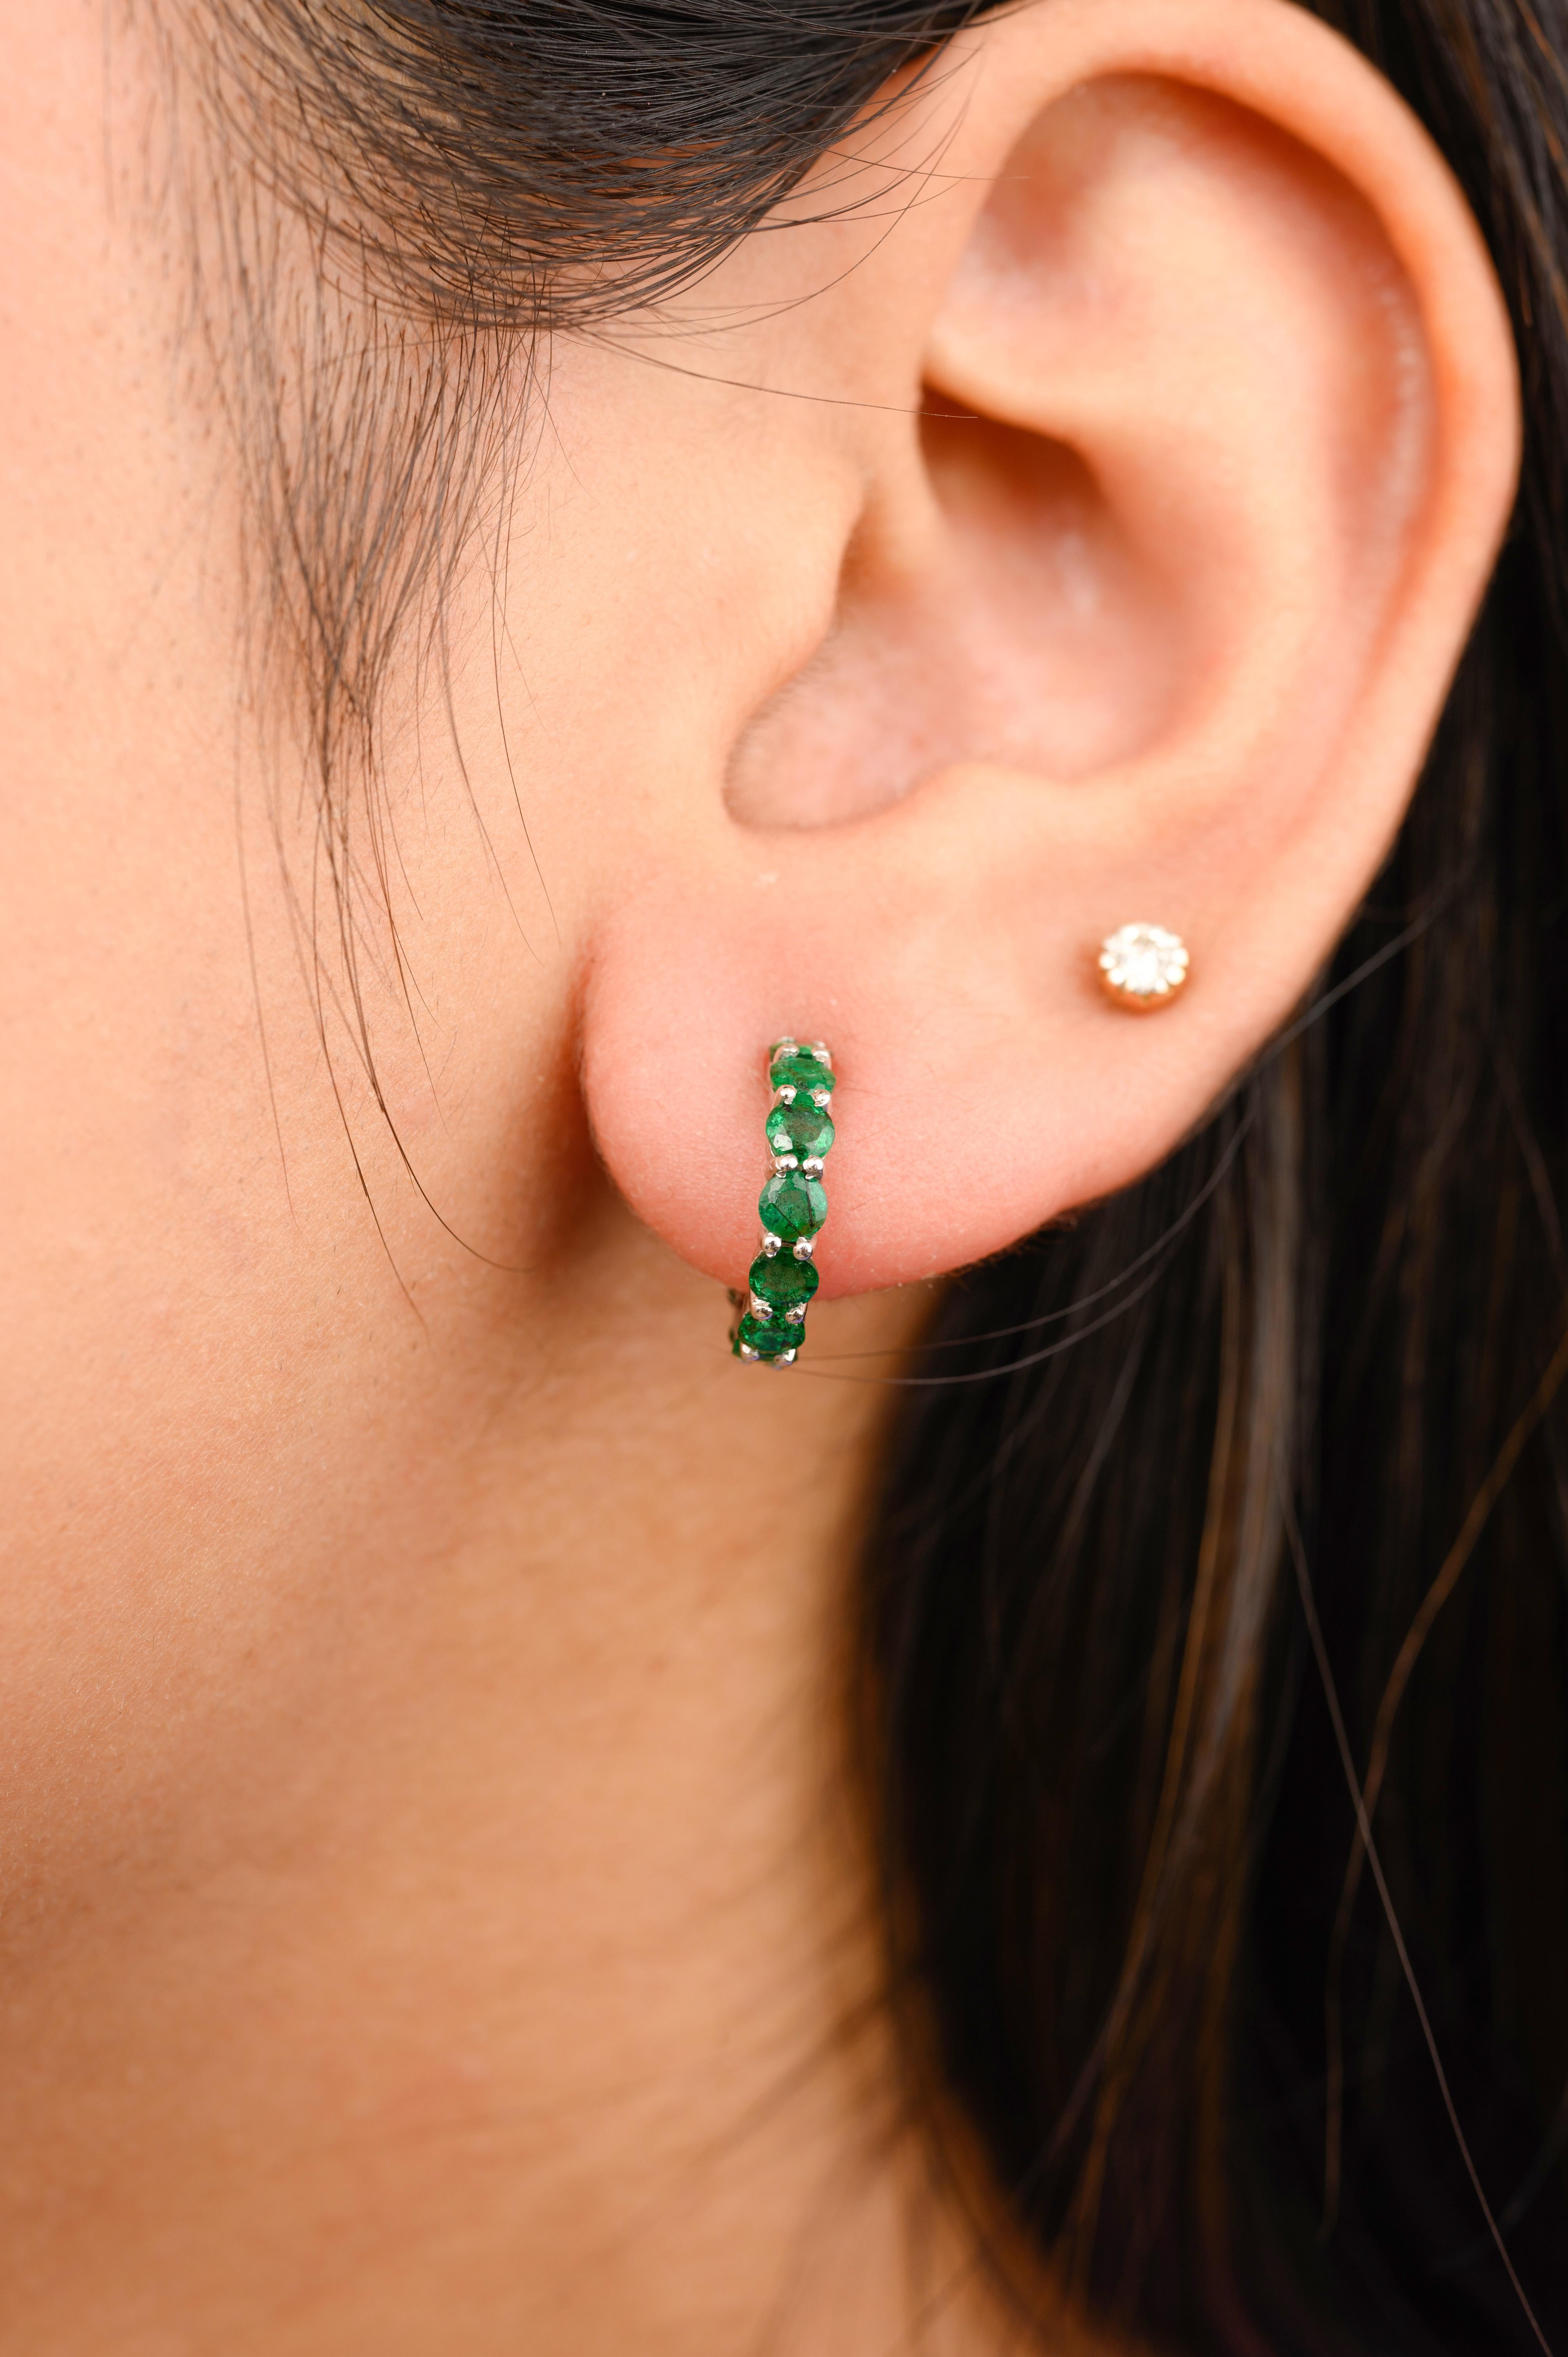 Deep Green Emerald Birthstone Tiny Hoop Earrings in 18K Gold to make a statement with your look. You shall need stud earrings to make a statement with your look. These earrings create a sparkling, luxurious look featuring round cut emerald.
Emerald